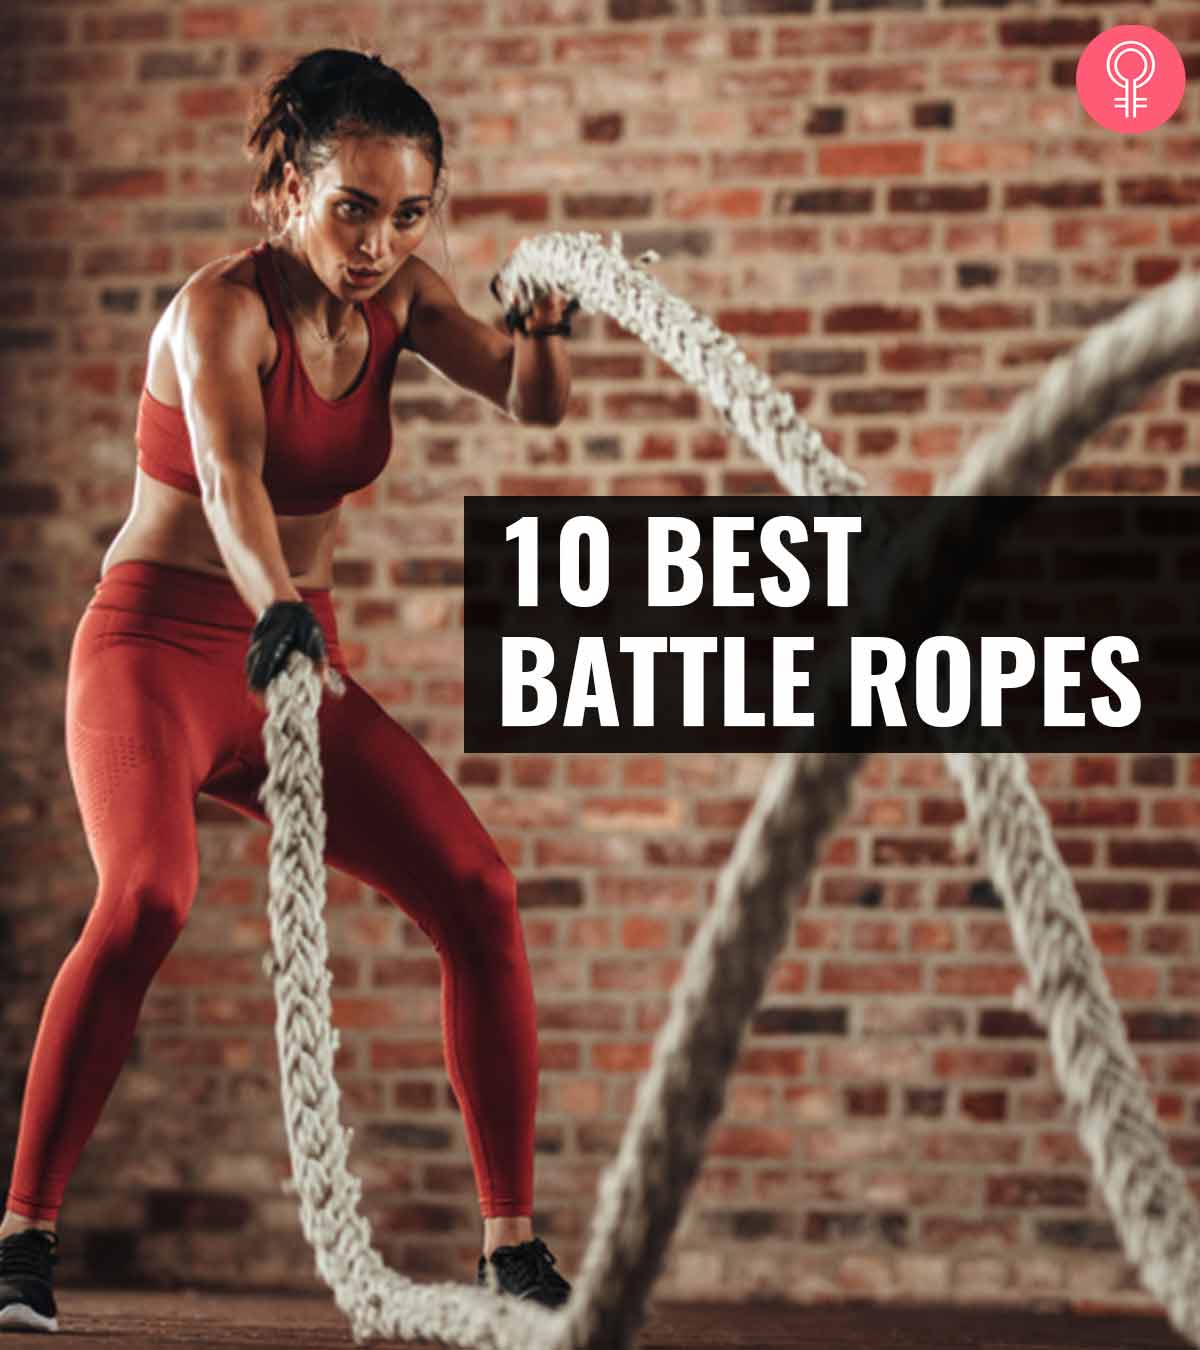 10 Best Battle Ropes For Your Next Workout – 2022